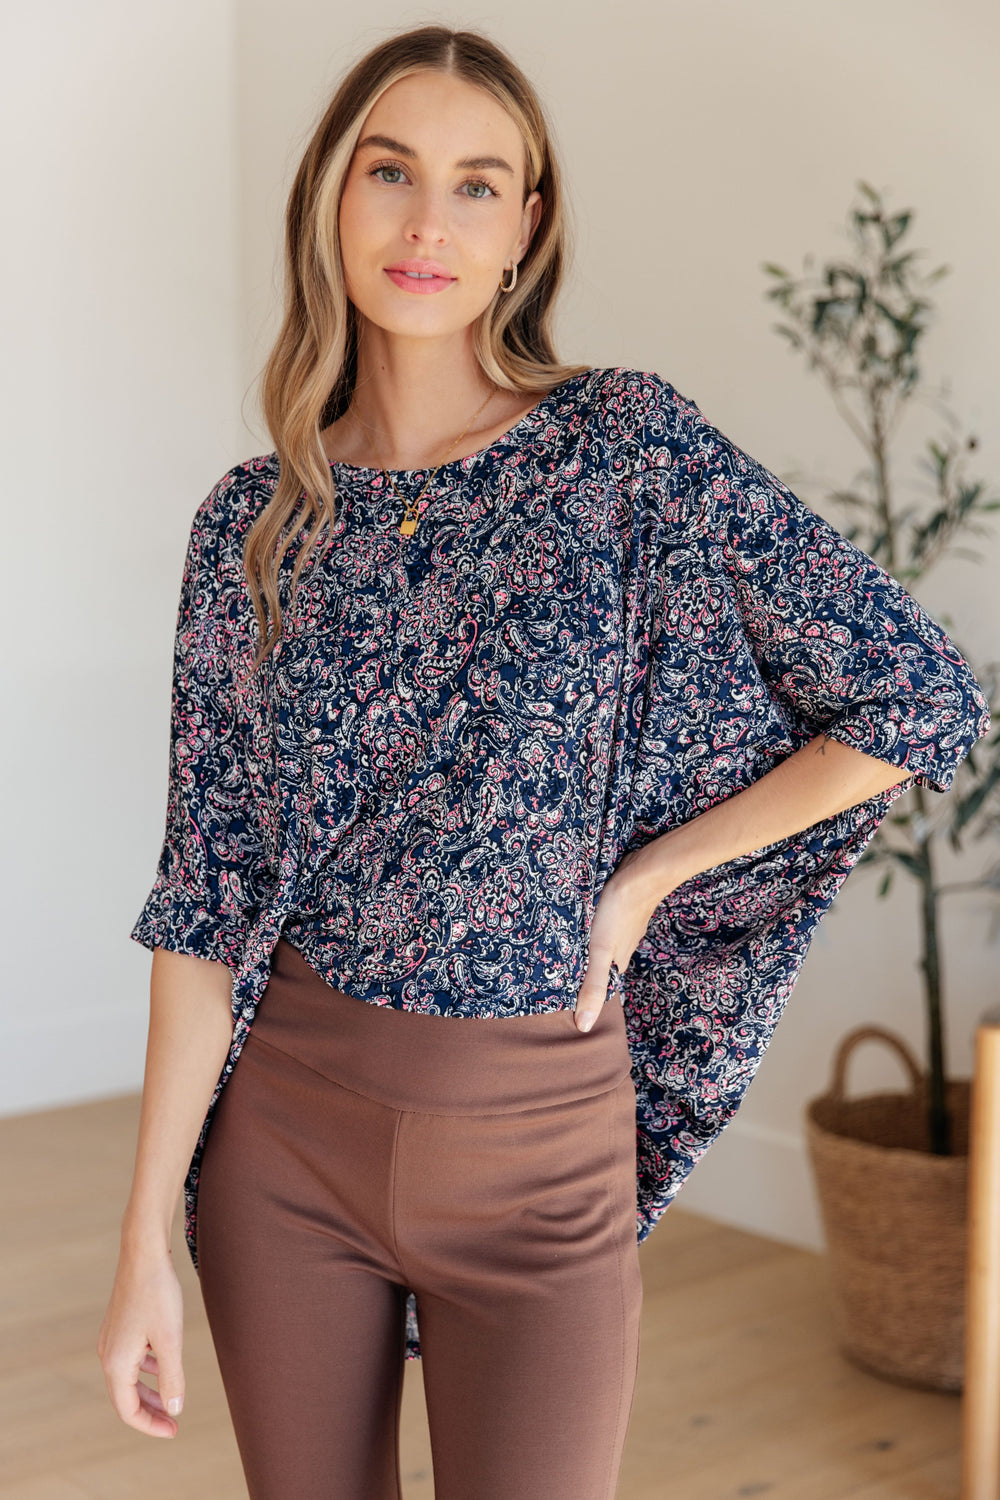 Essential Blouse in Navy Paisley-Short Sleeve Tops-Inspired by Justeen-Women's Clothing Boutique in Chicago, Illinois